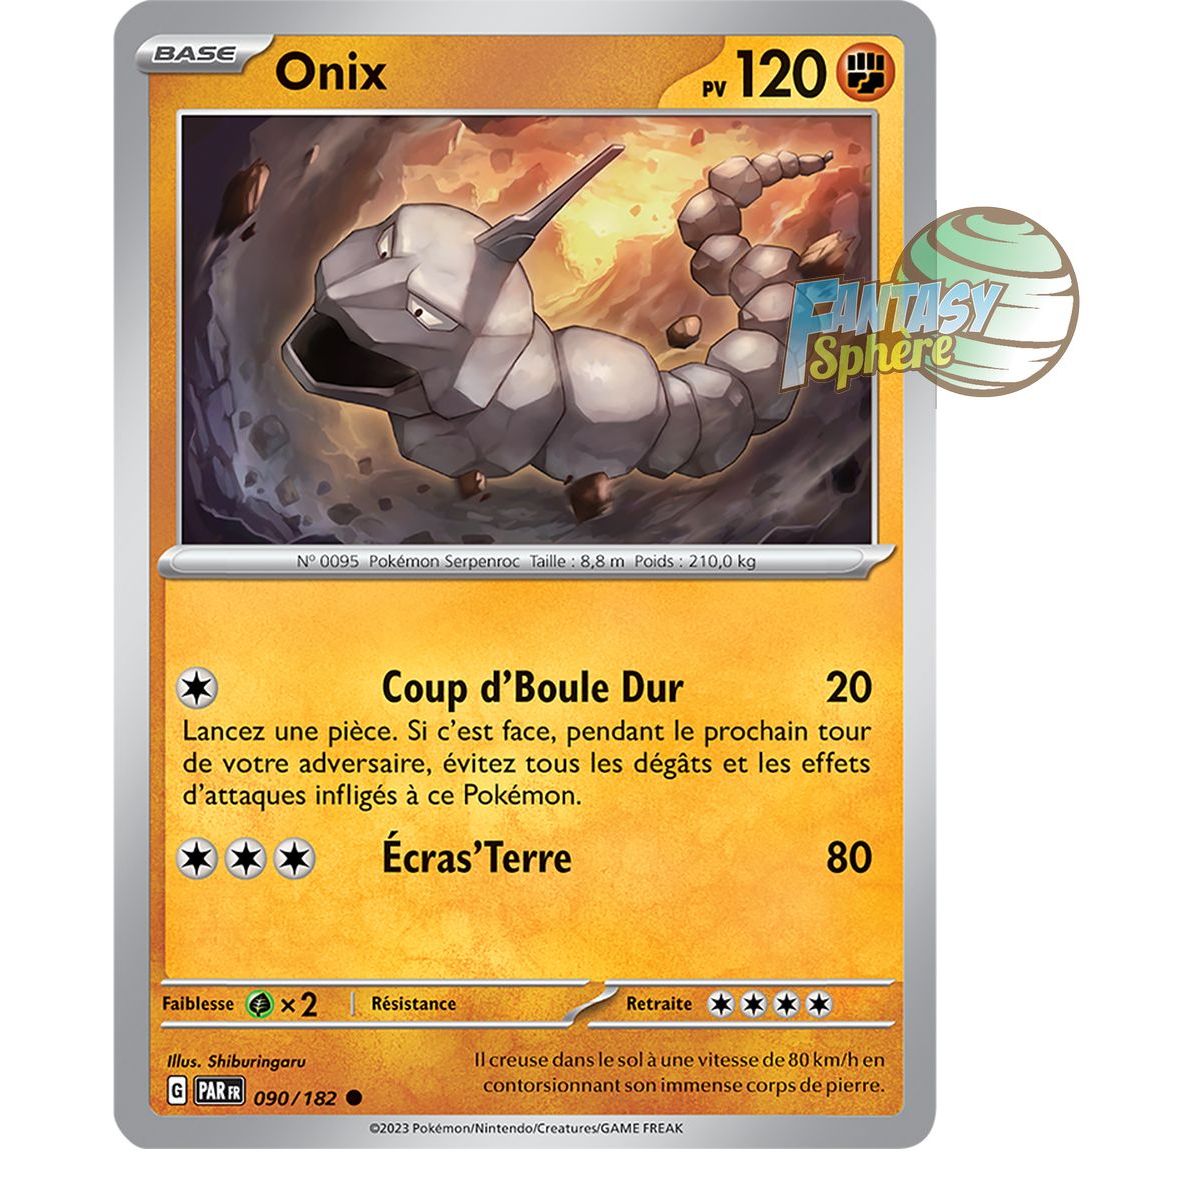 Onix - Commune 90/182 - Scarlet and Violet Faille Paradox